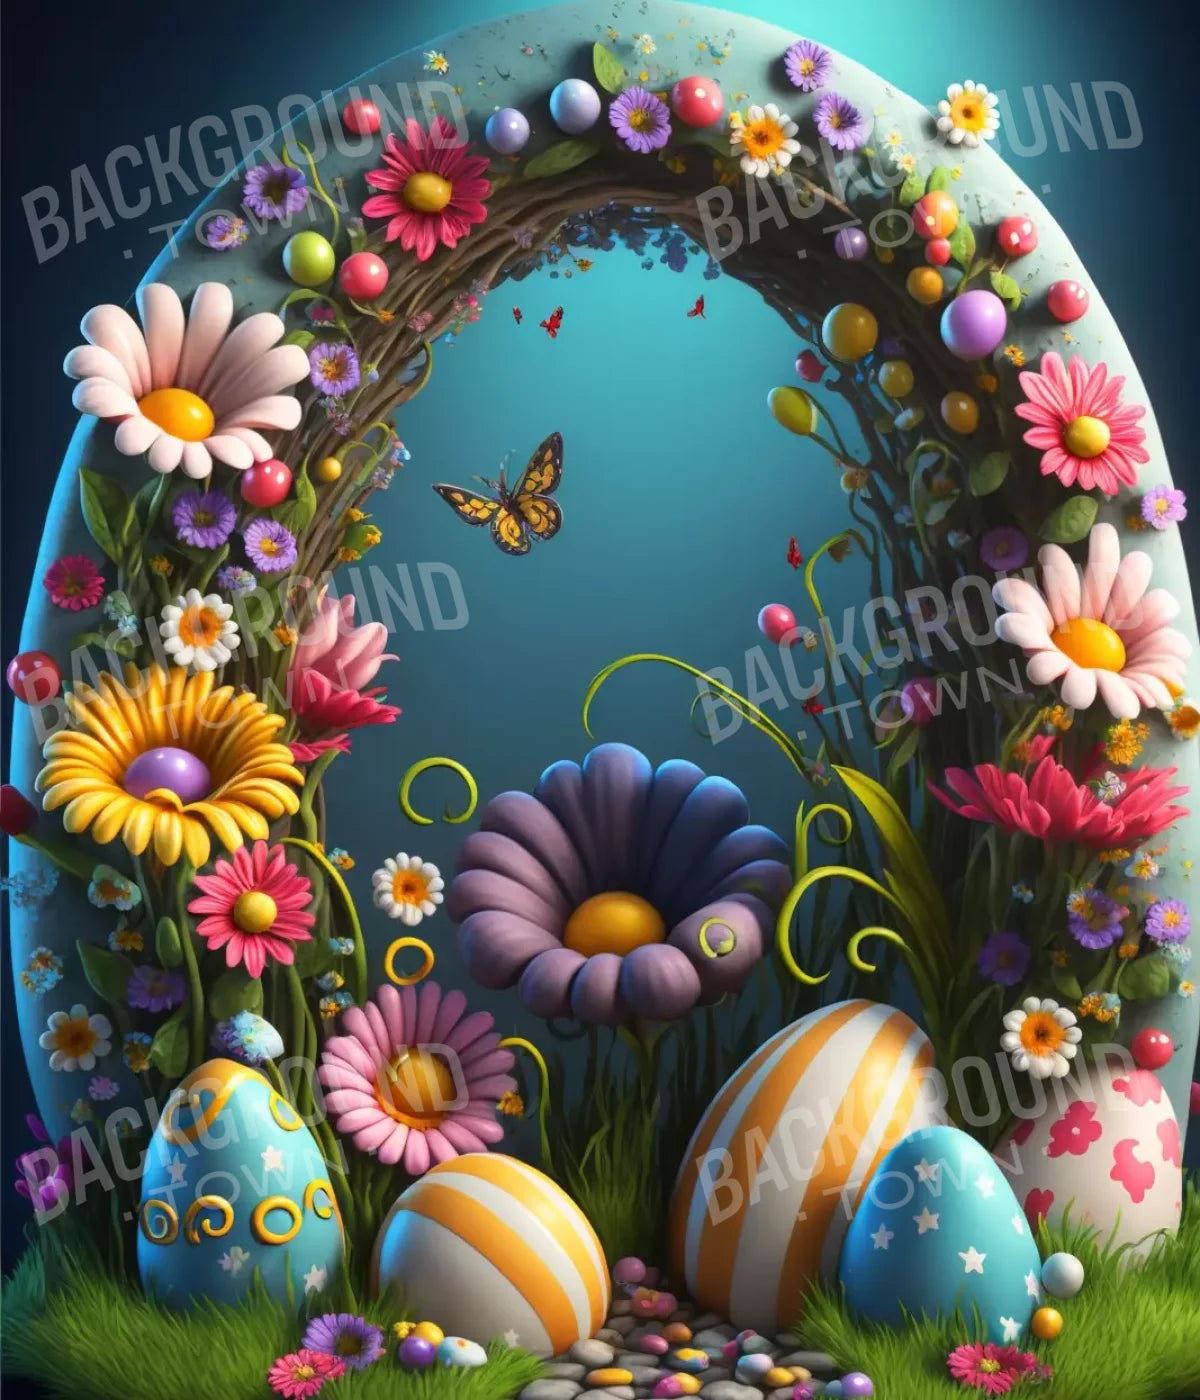 Easter Egg Arch 10X12 Ultracloth ( 120 X 144 Inch ) Backdrop